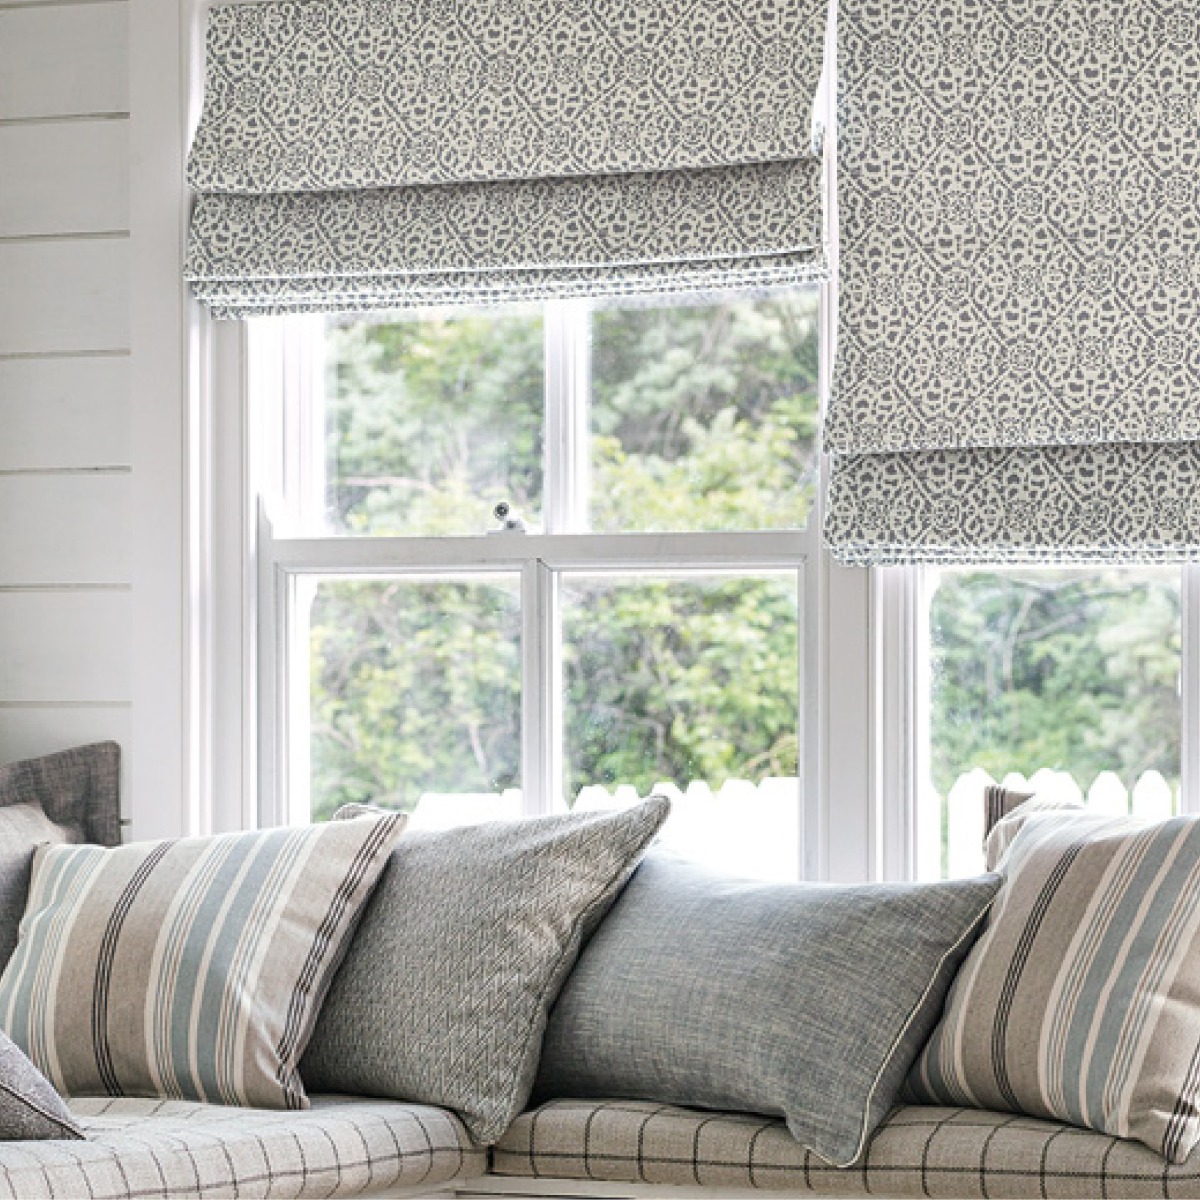 Do roman blinds attach with velcro?